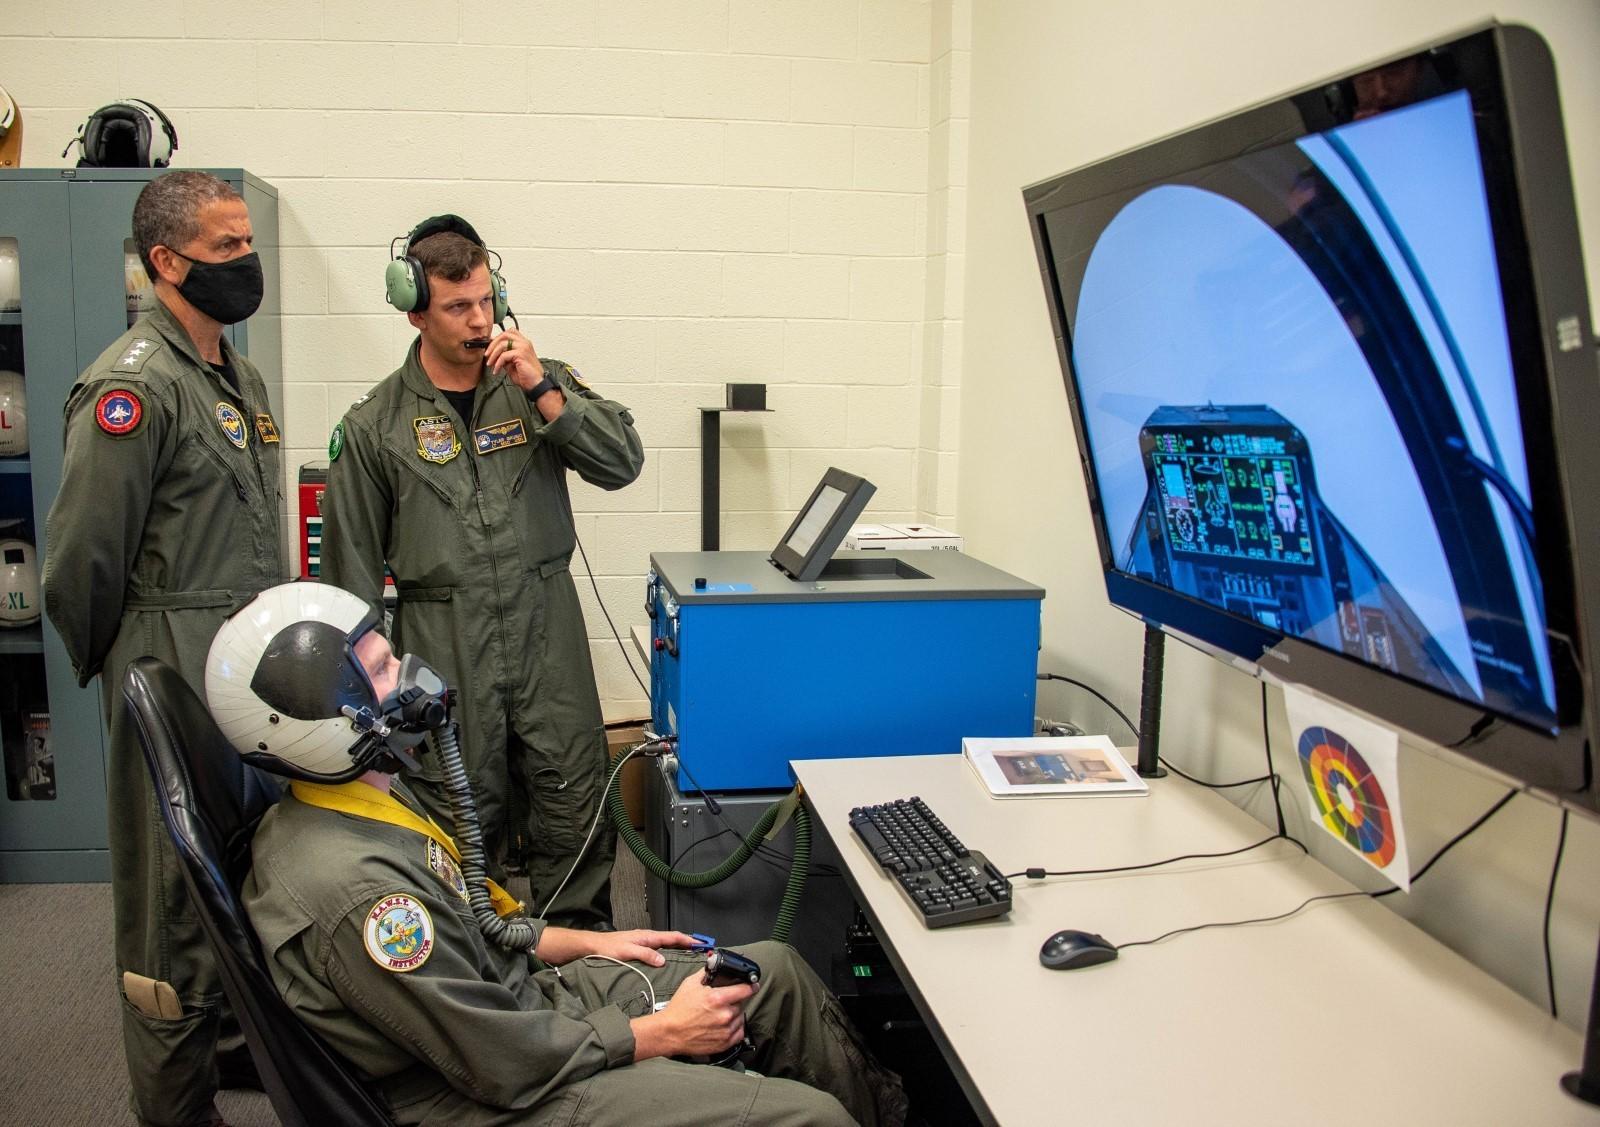 New Mask On Breathing Device To Train Naval Aviators With Distress Symptoms